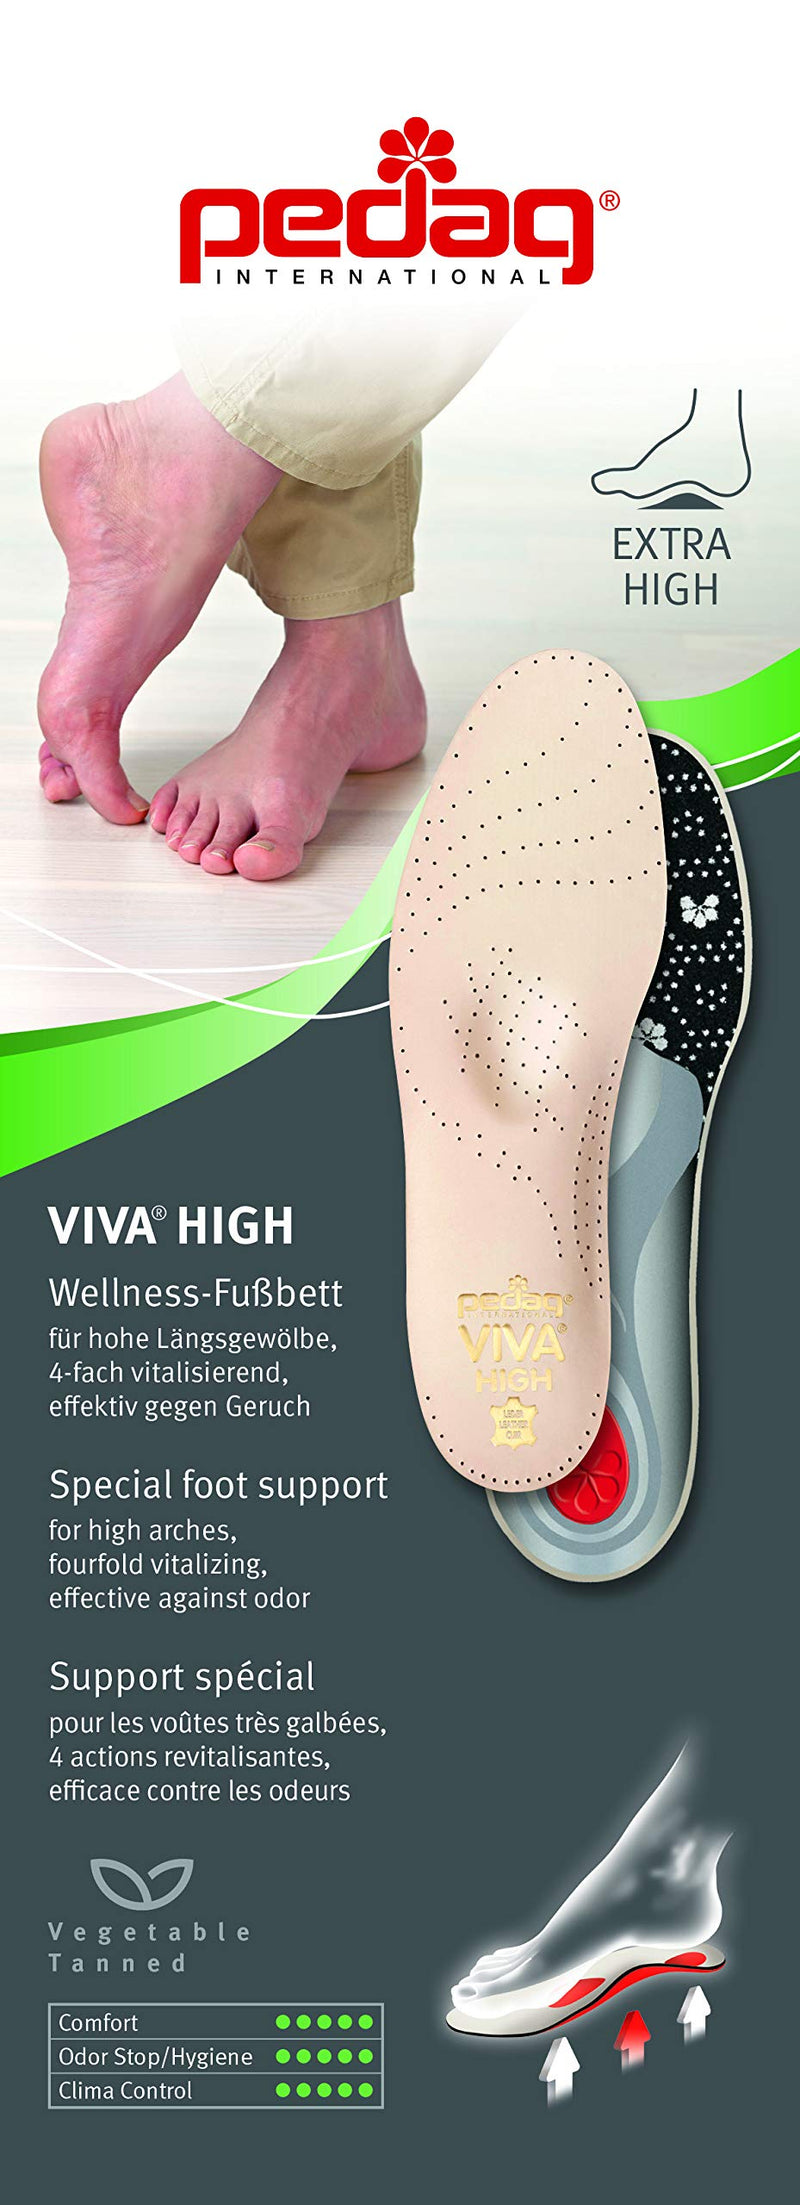 [Australia] - pedag Viva High Inserts, Handmade in Germany, Provides Support to Extra High Longitudinal Arch, Cushions The Heel and Metatarsal Arch, Charcoal Layer, Natural Leather, Tan, Men US 10 / EU 43 M10 / EU 43 